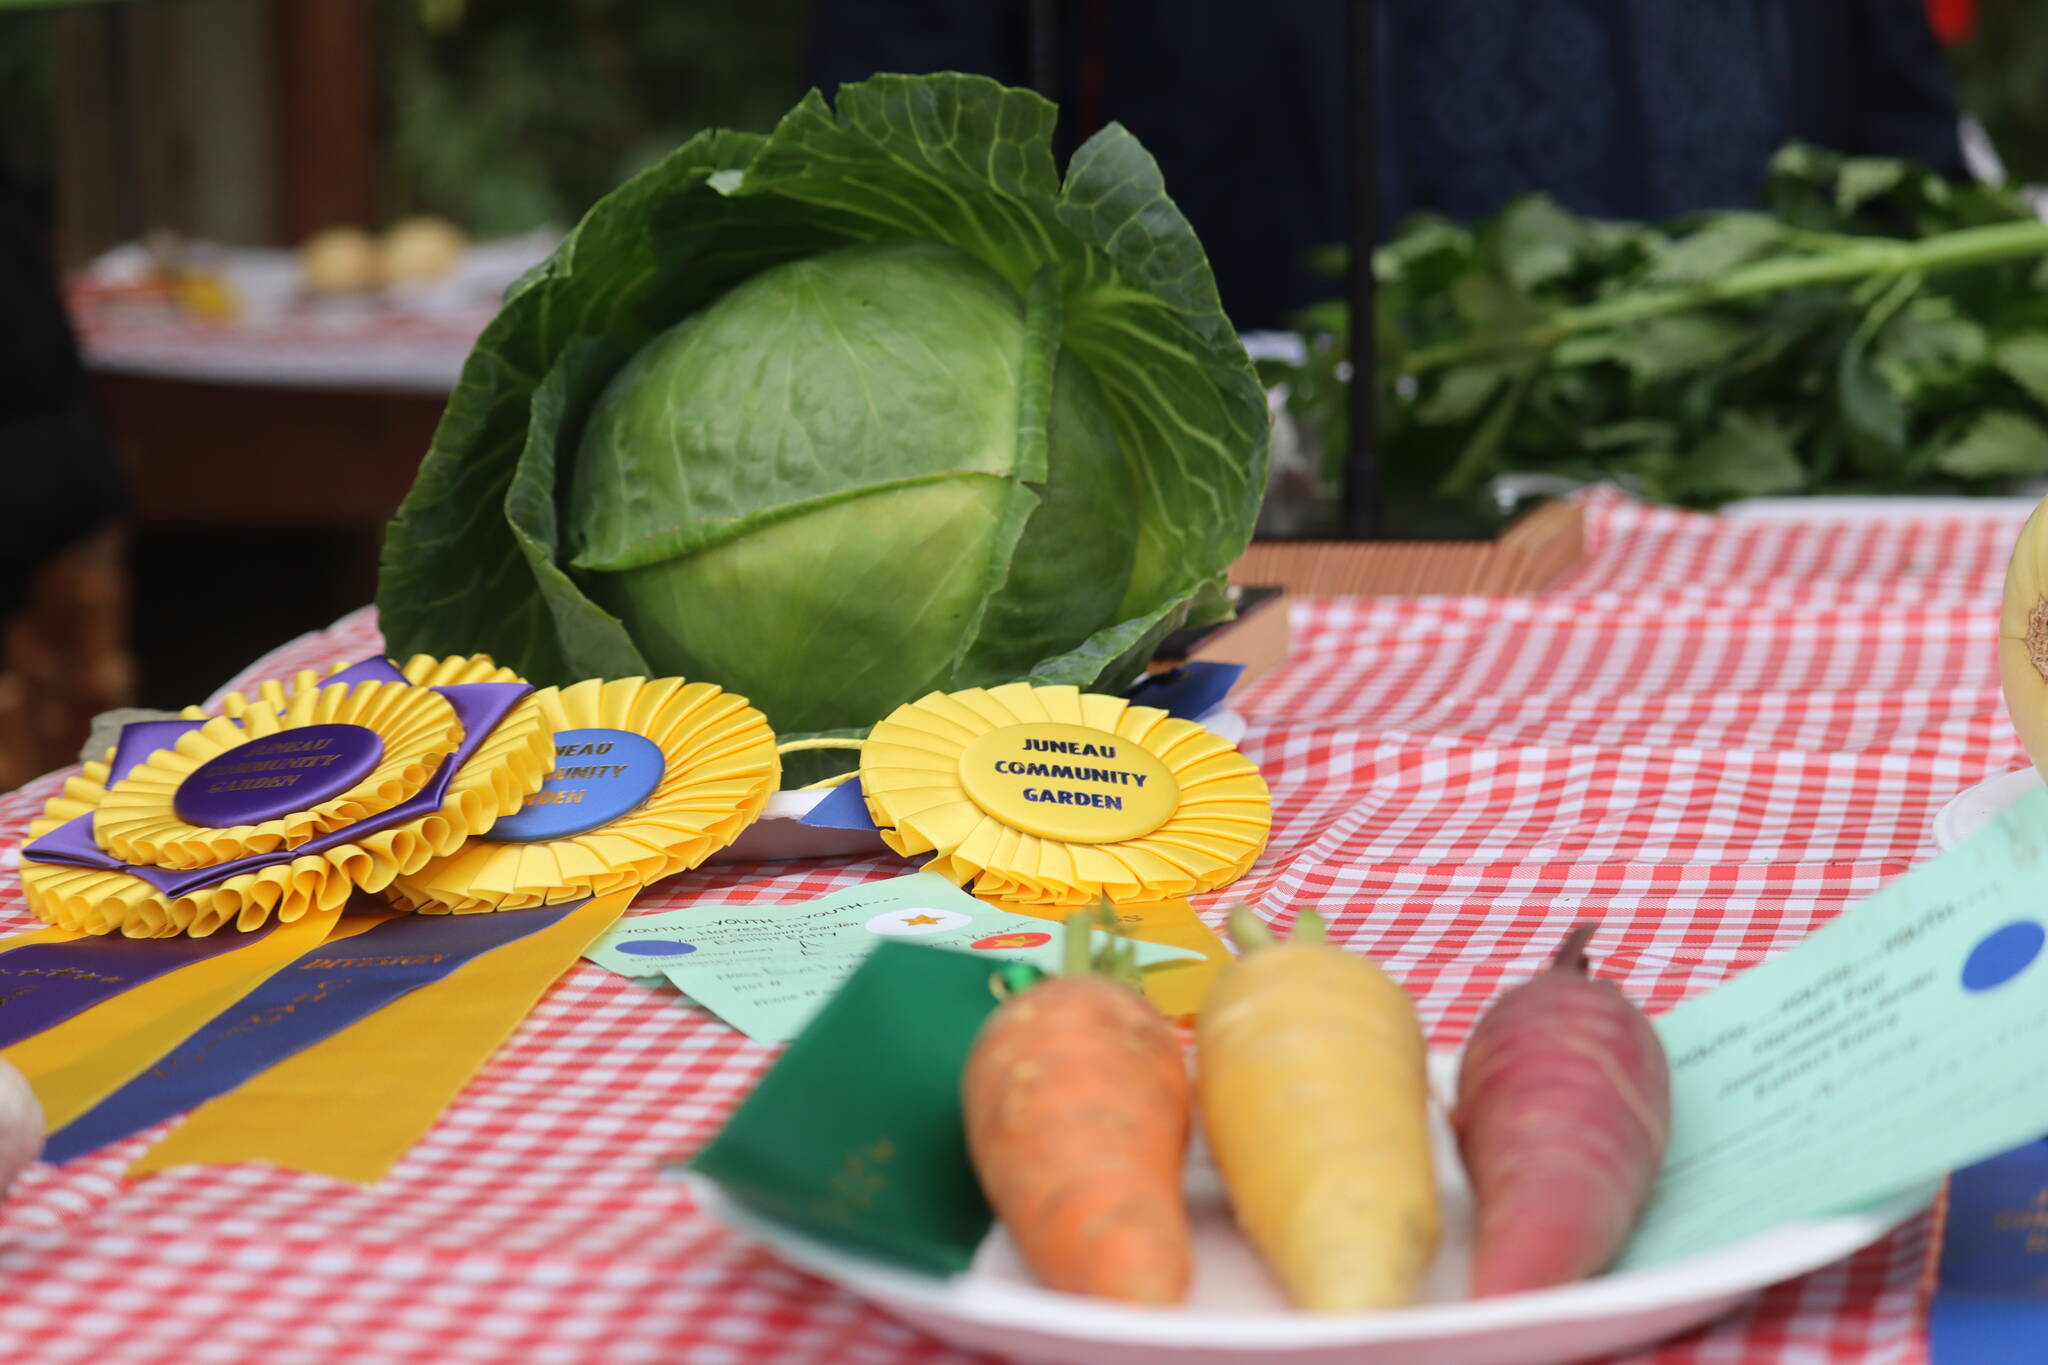 Prizes were awarded for many different categories on Saturday at Juneau Community Garden’s Annual Harvest Fair. (Jonson Kuhn / Juneau Empire)